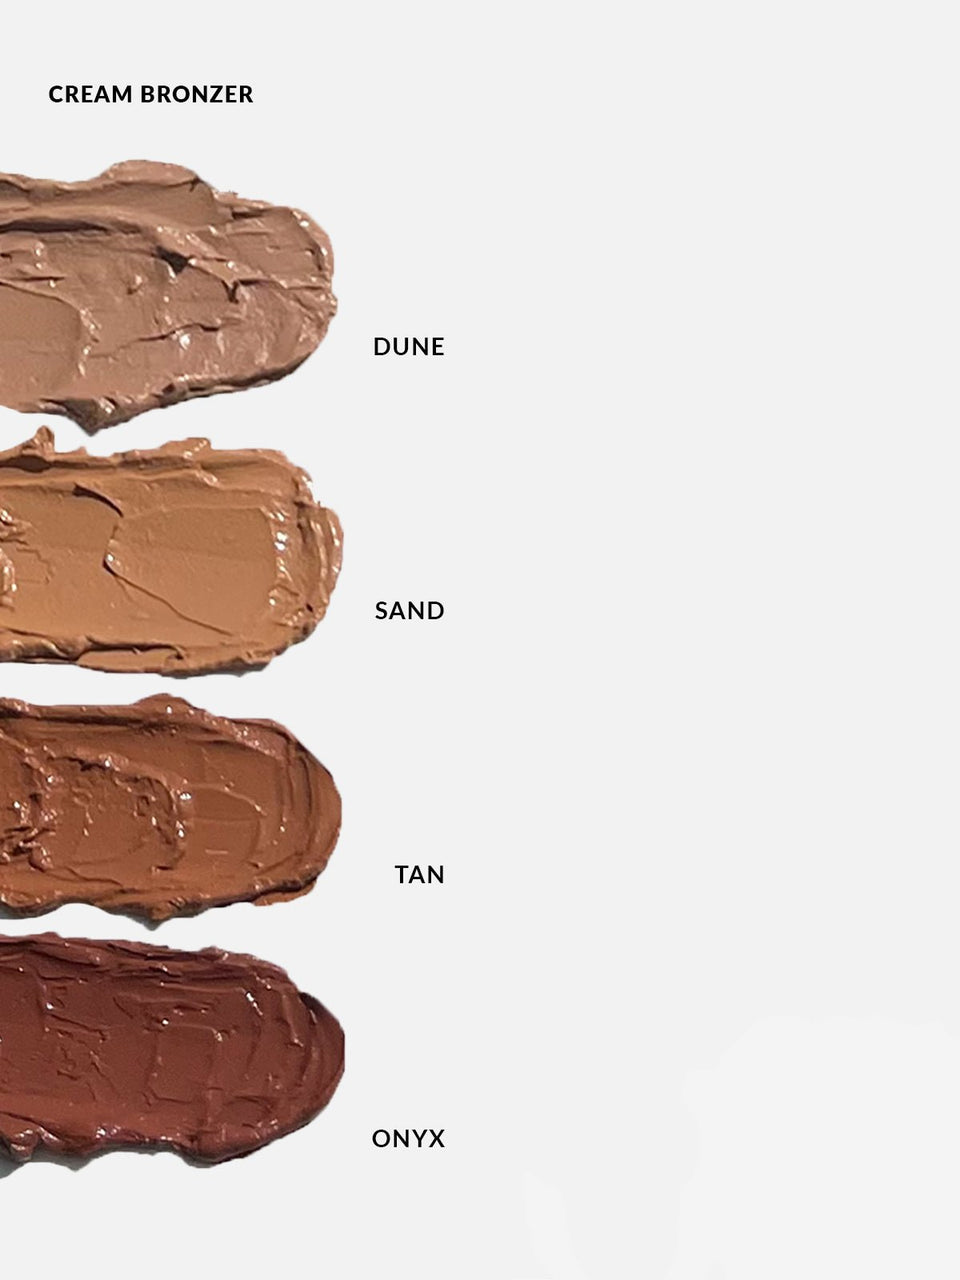 REFY CREAM BRONZER SHADE SWATCHES. 4 SHADES TO CHOOSE FROM